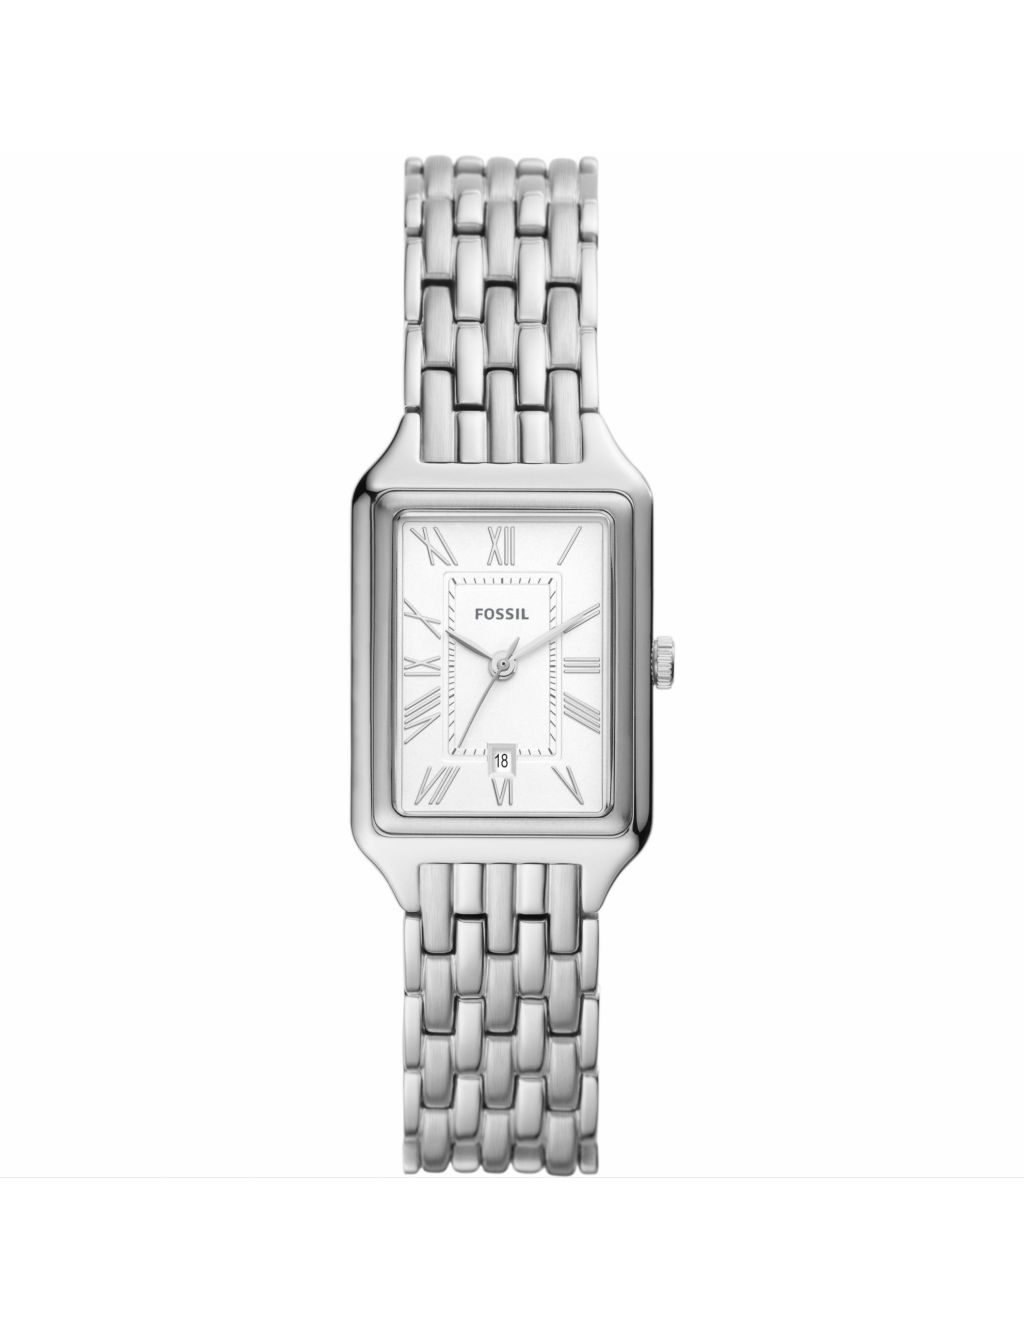 Fossil Raquel Stainless Steel Watch image 1